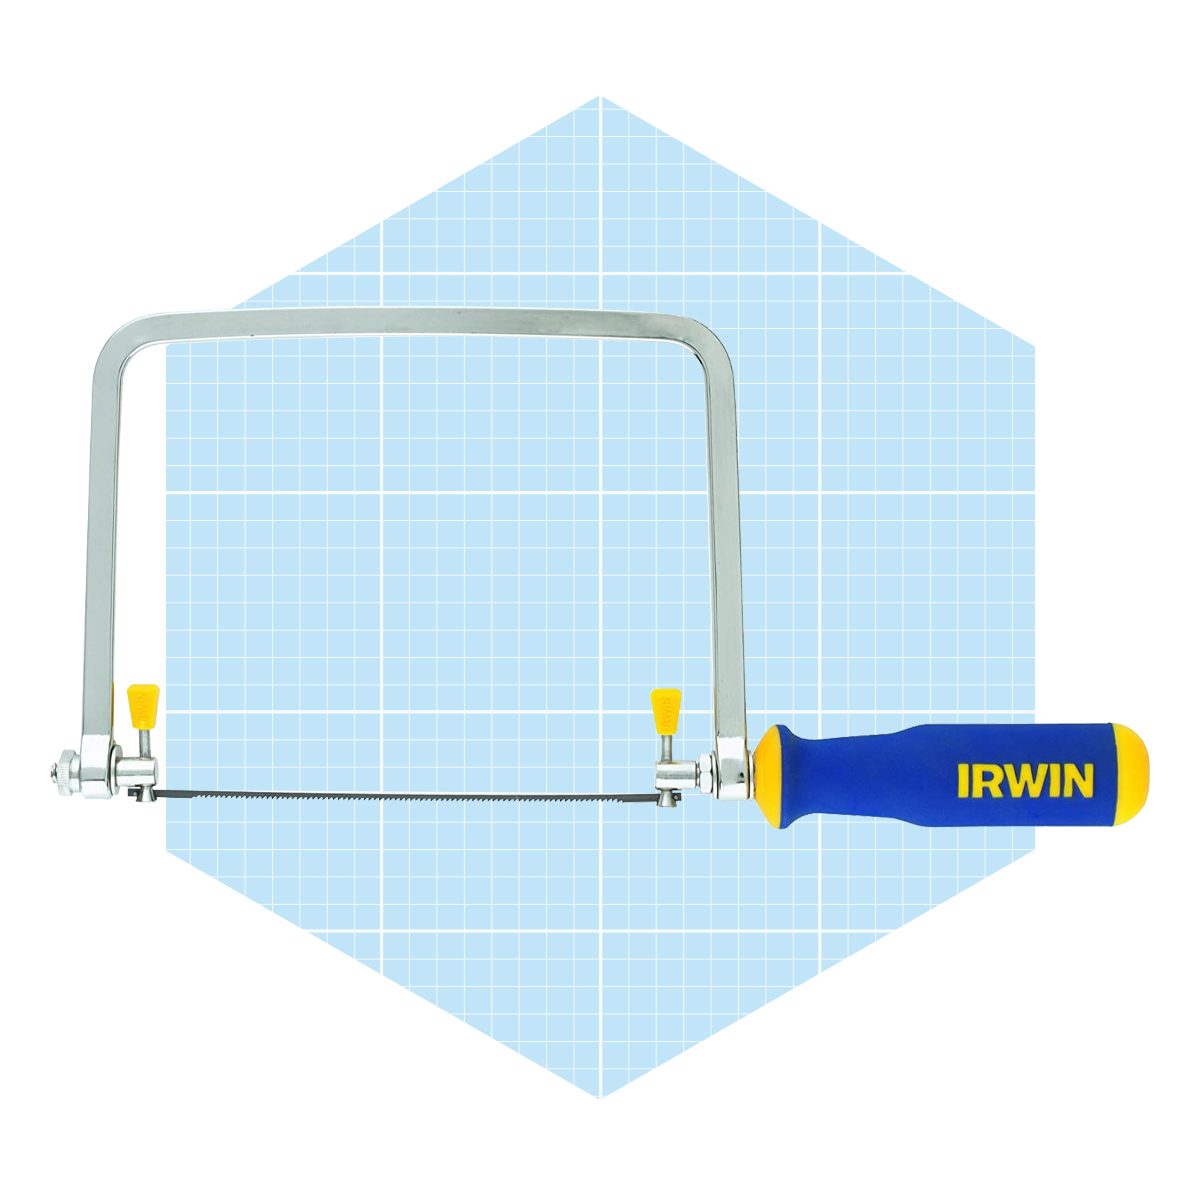 Irwin Tools Protouch Coping Saw Ecomm Amazon.com